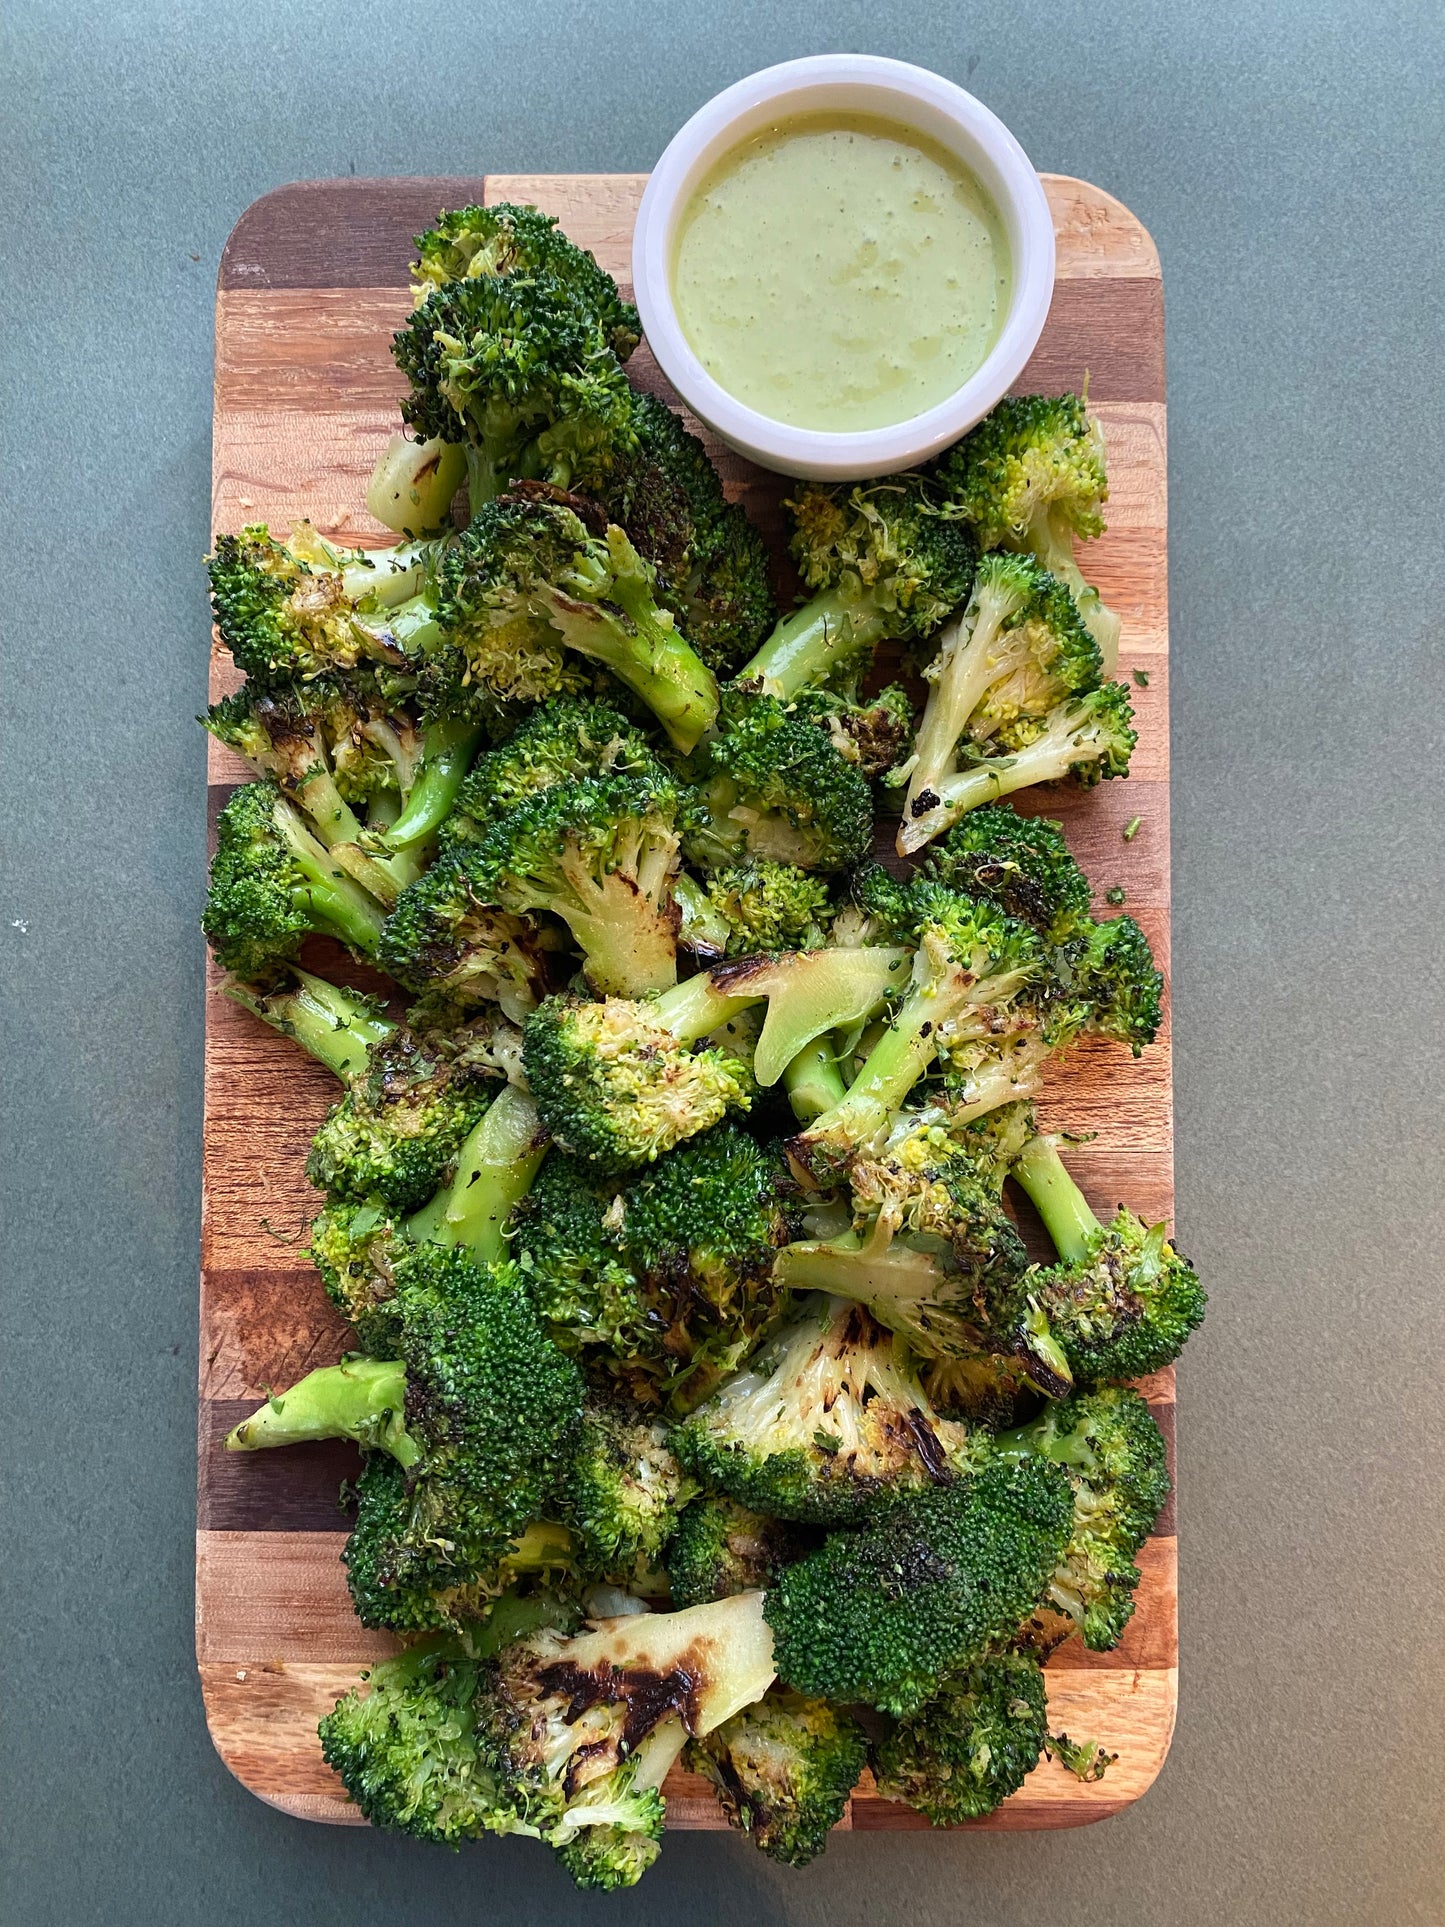 Roasted Broccoli with Green Goddess Dressing